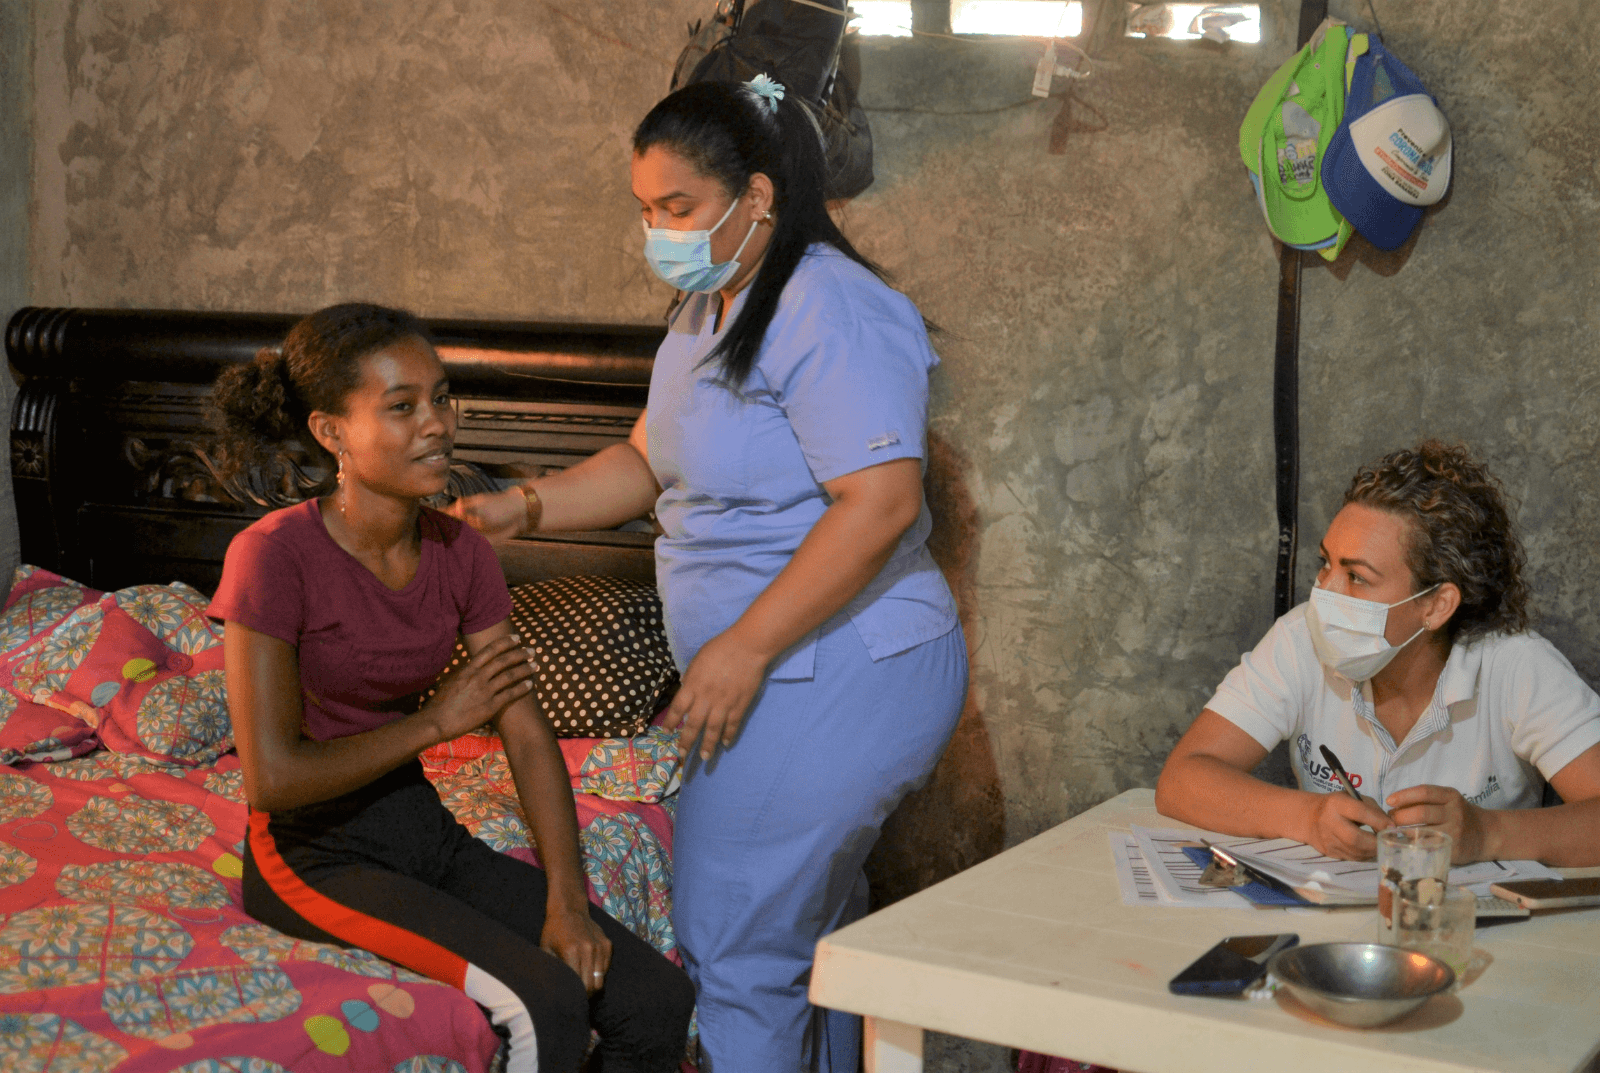 Population Matters’ Guest Report from Colombia: Conservation Through Education and Family Planning